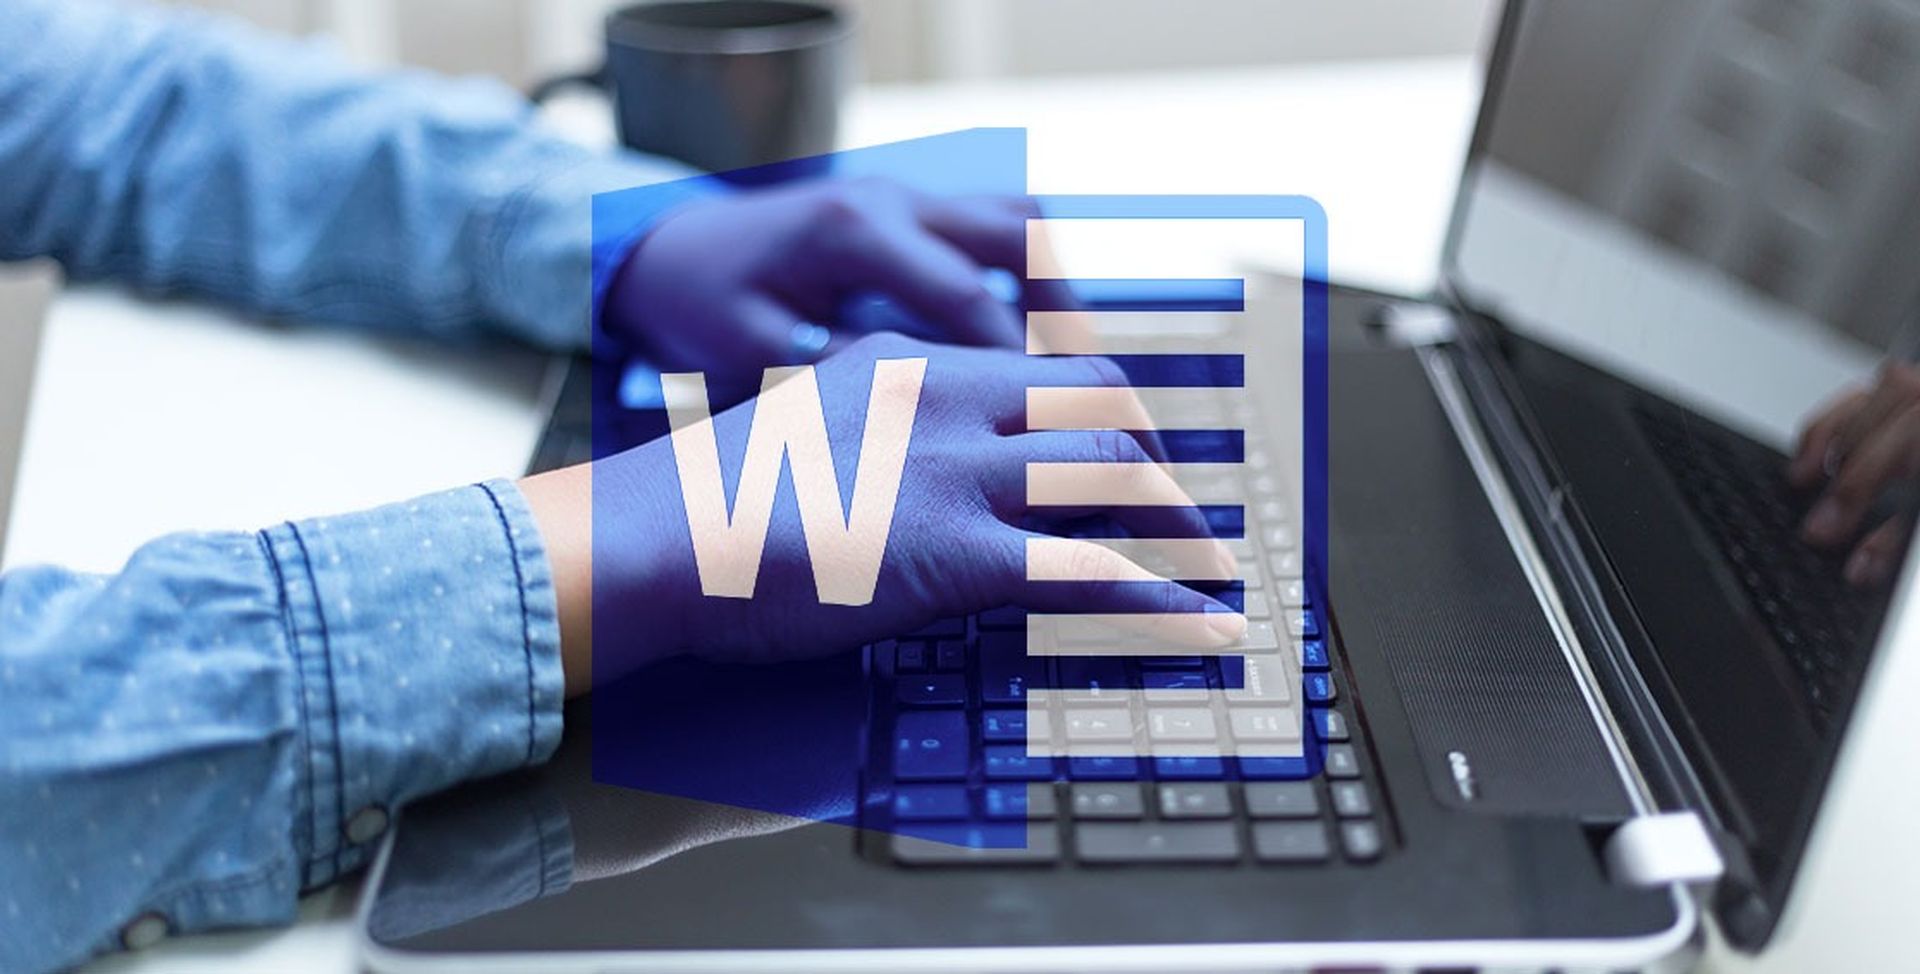 A new zero-day Microsoft Word vulnerability could give hackers complete control of your computer. Even if you don't open an infected file, the vulnerability may be exploited.